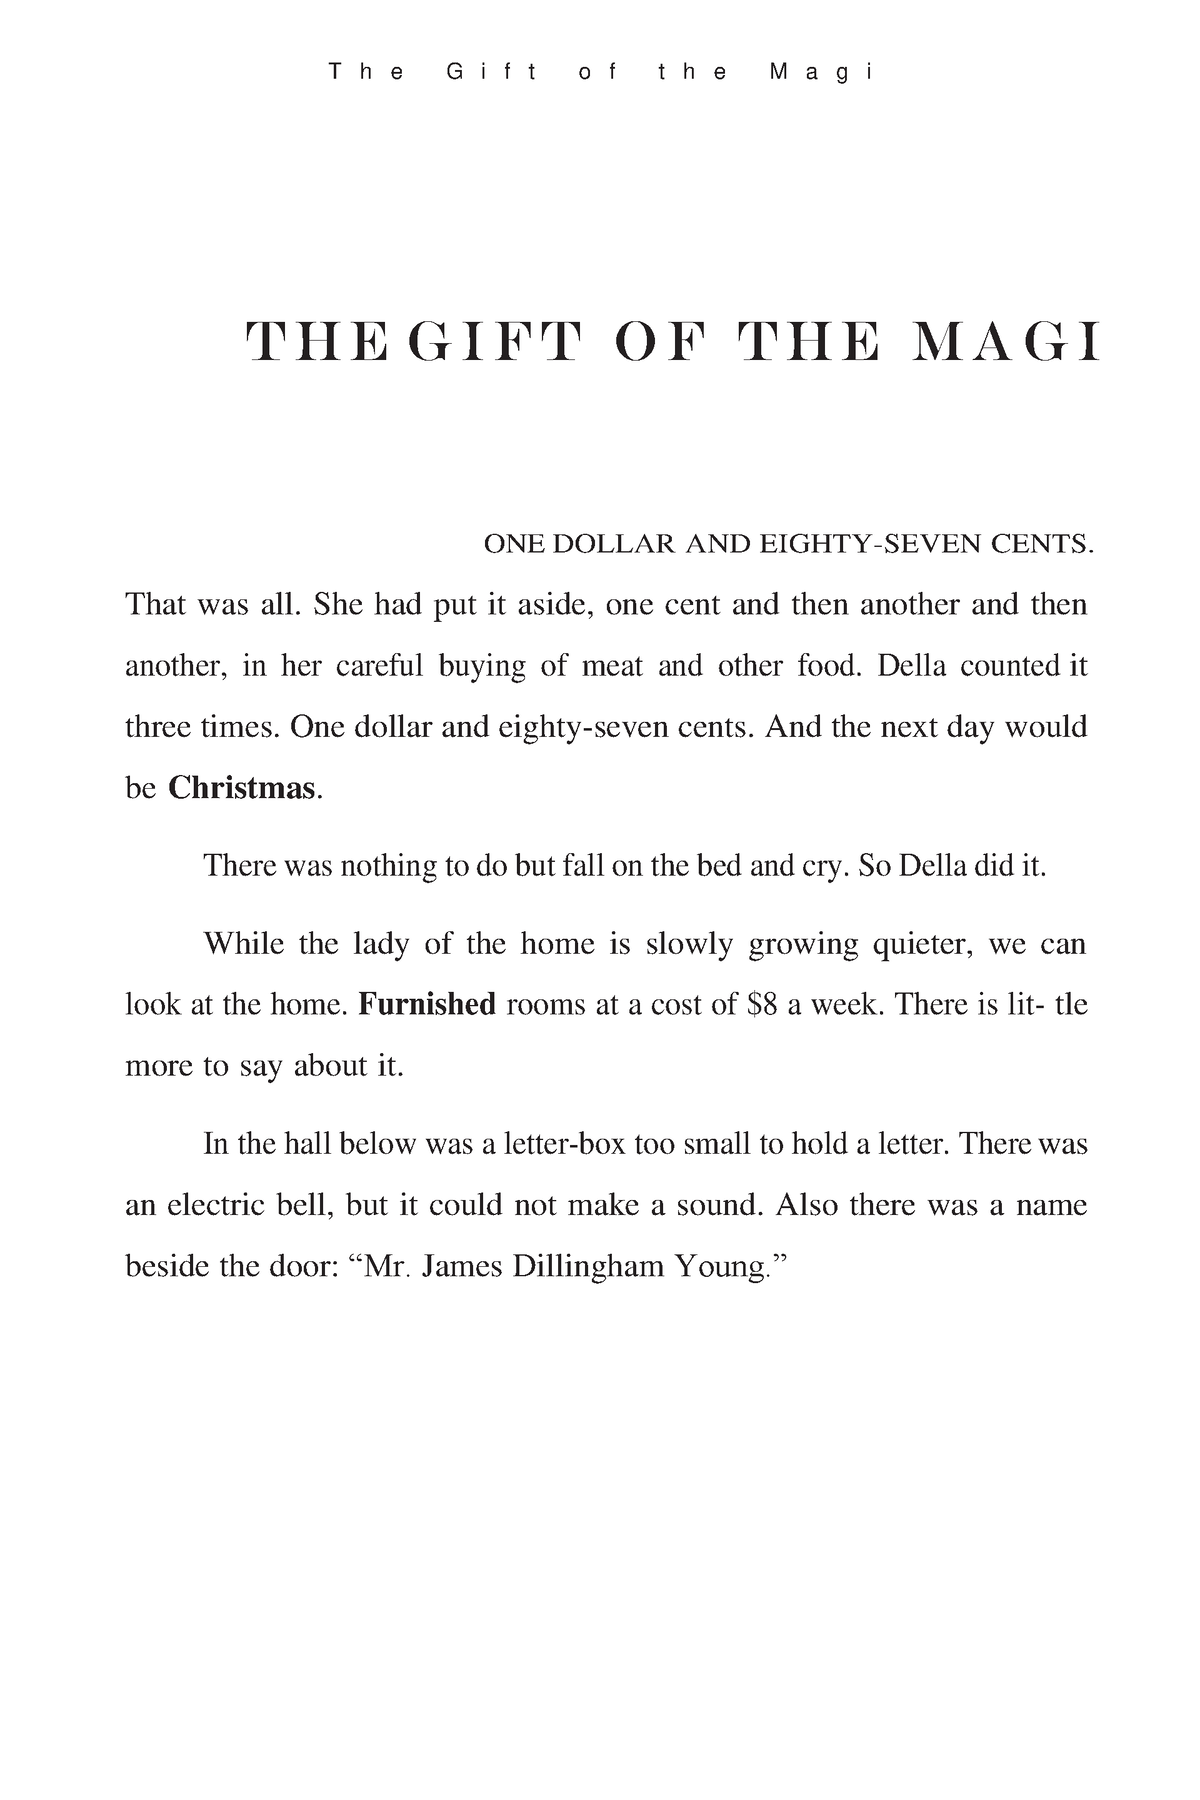 the gift of the magi short story analysis